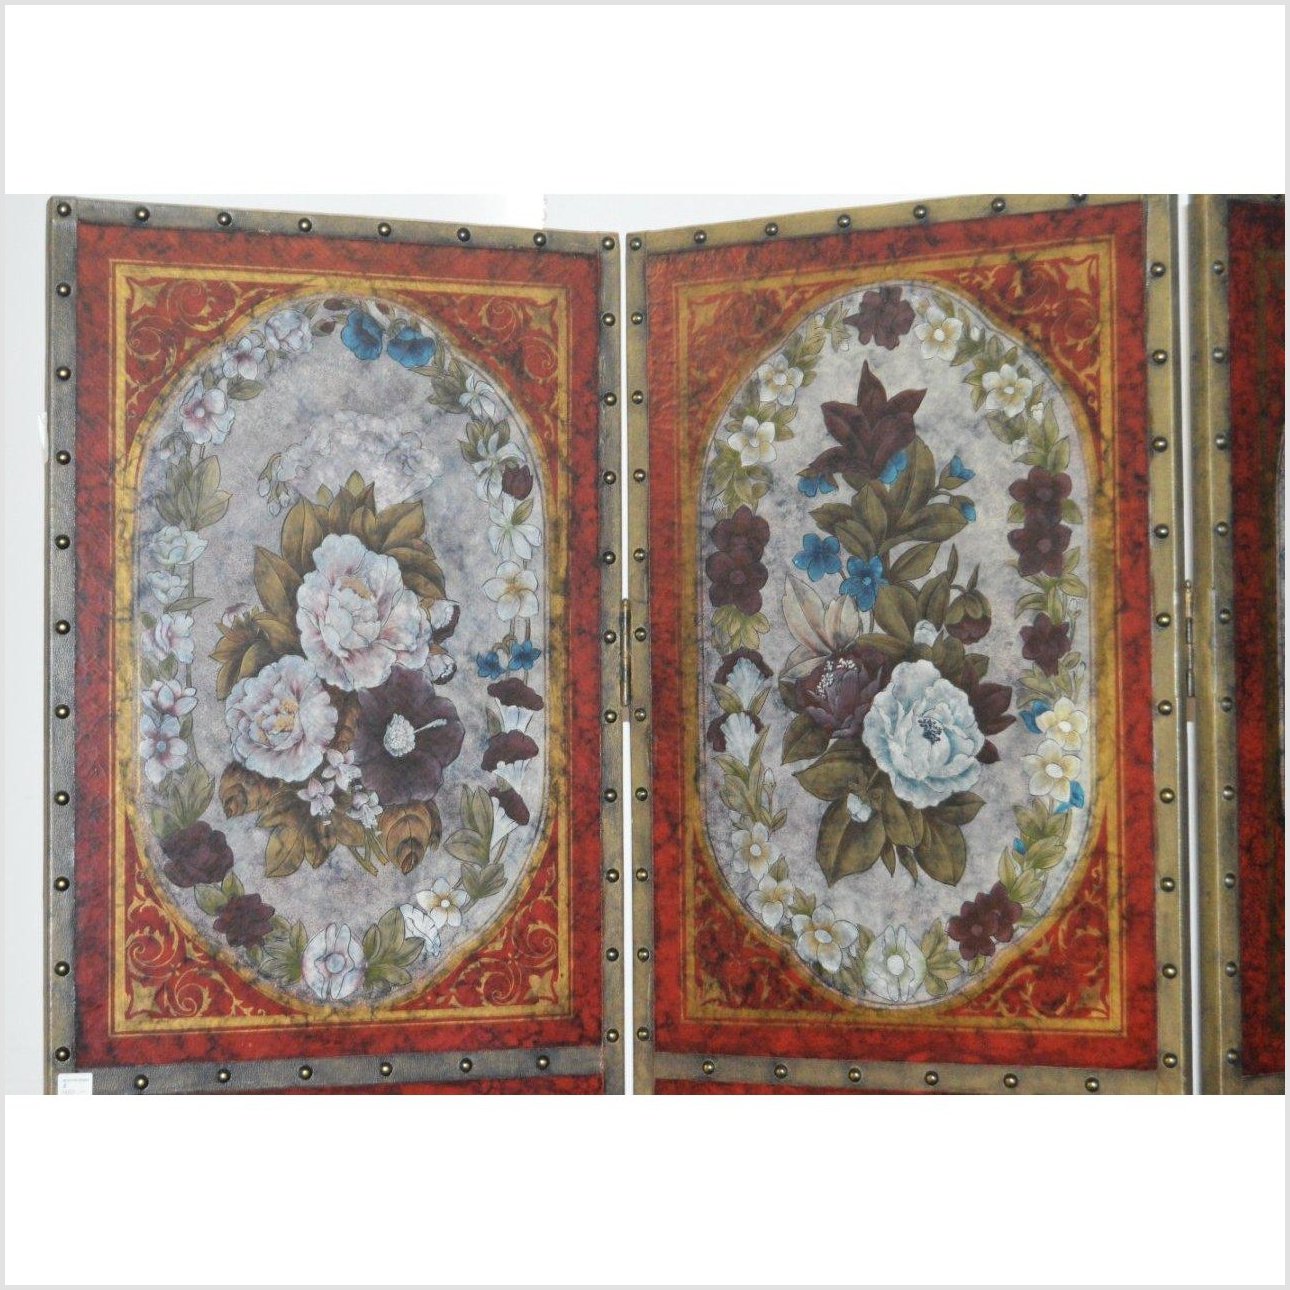 4-Panel Screen with Victorian Style Floral Design-YN2773-3. Asian & Chinese Furniture, Art, Antiques, Vintage Home Décor for sale at FEA Home